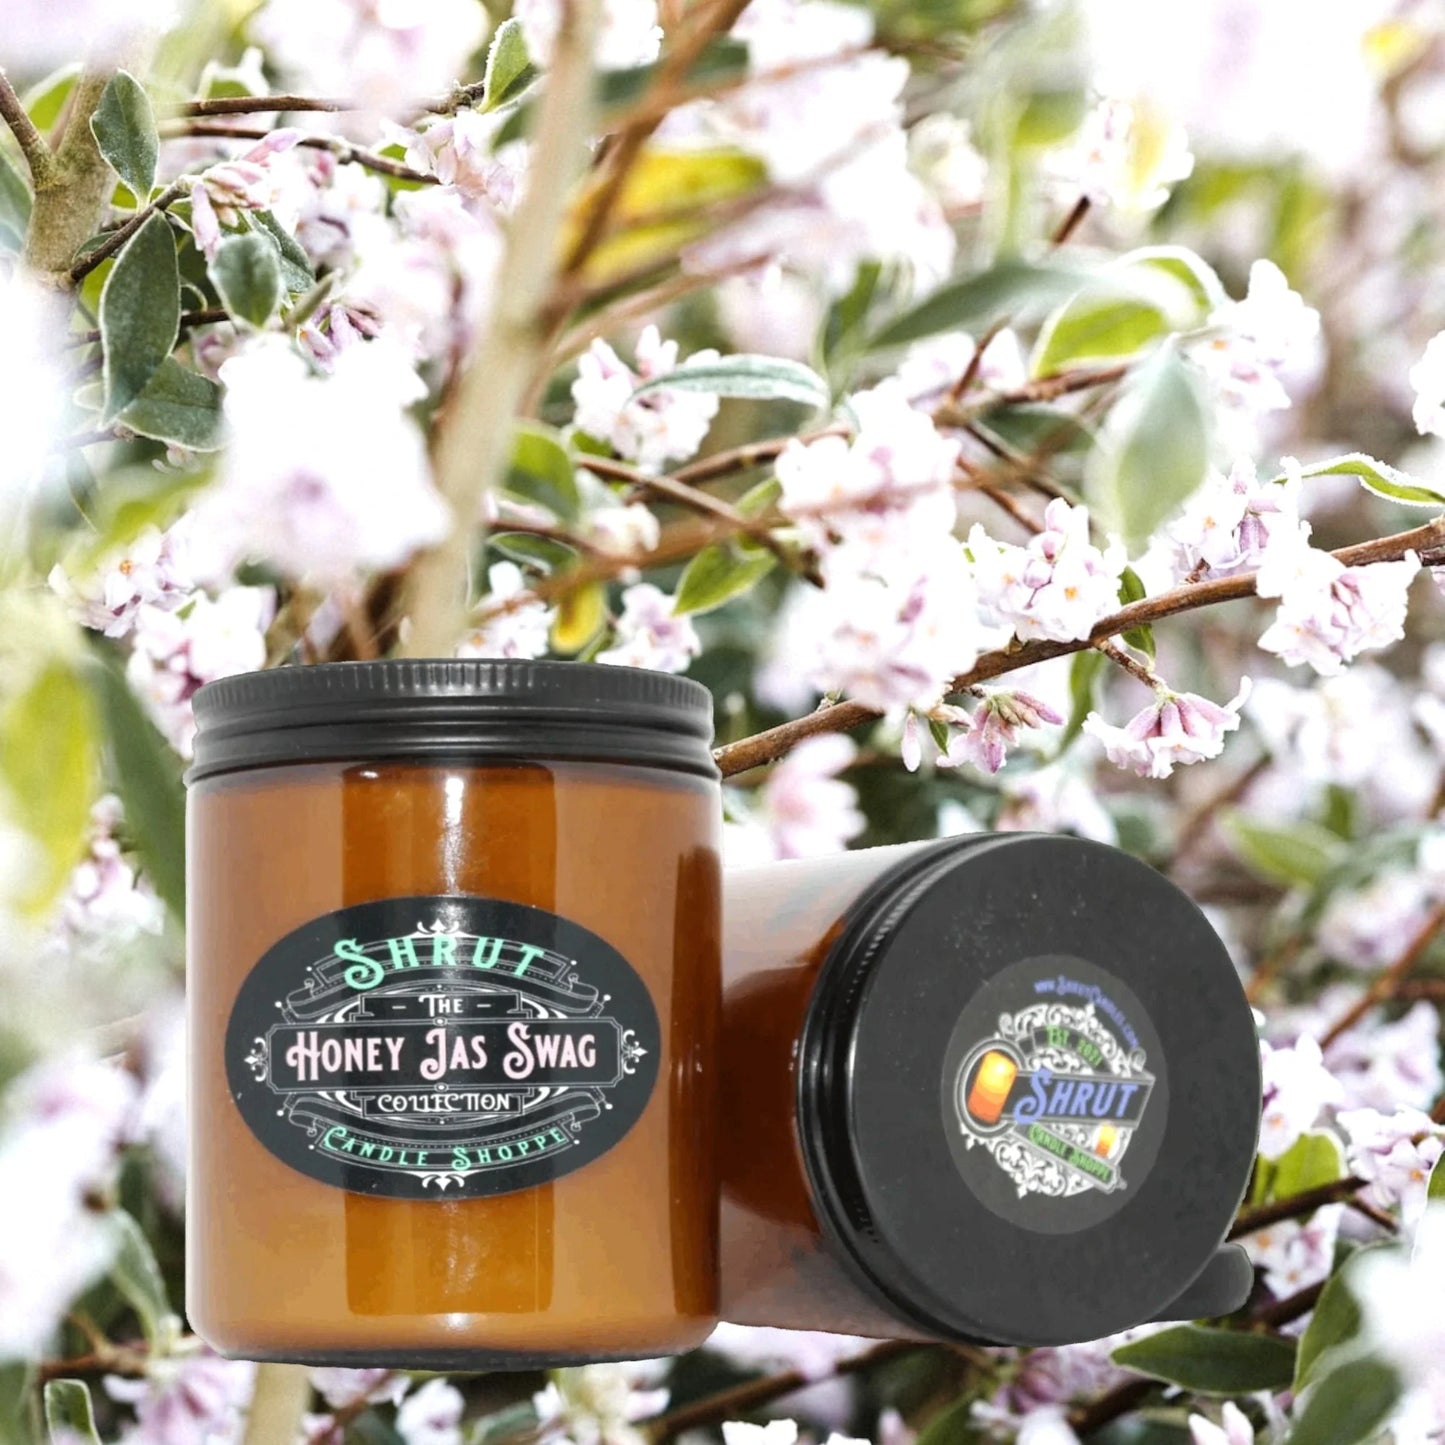 Honey Jas Swag Scented Candle - Essence of the South